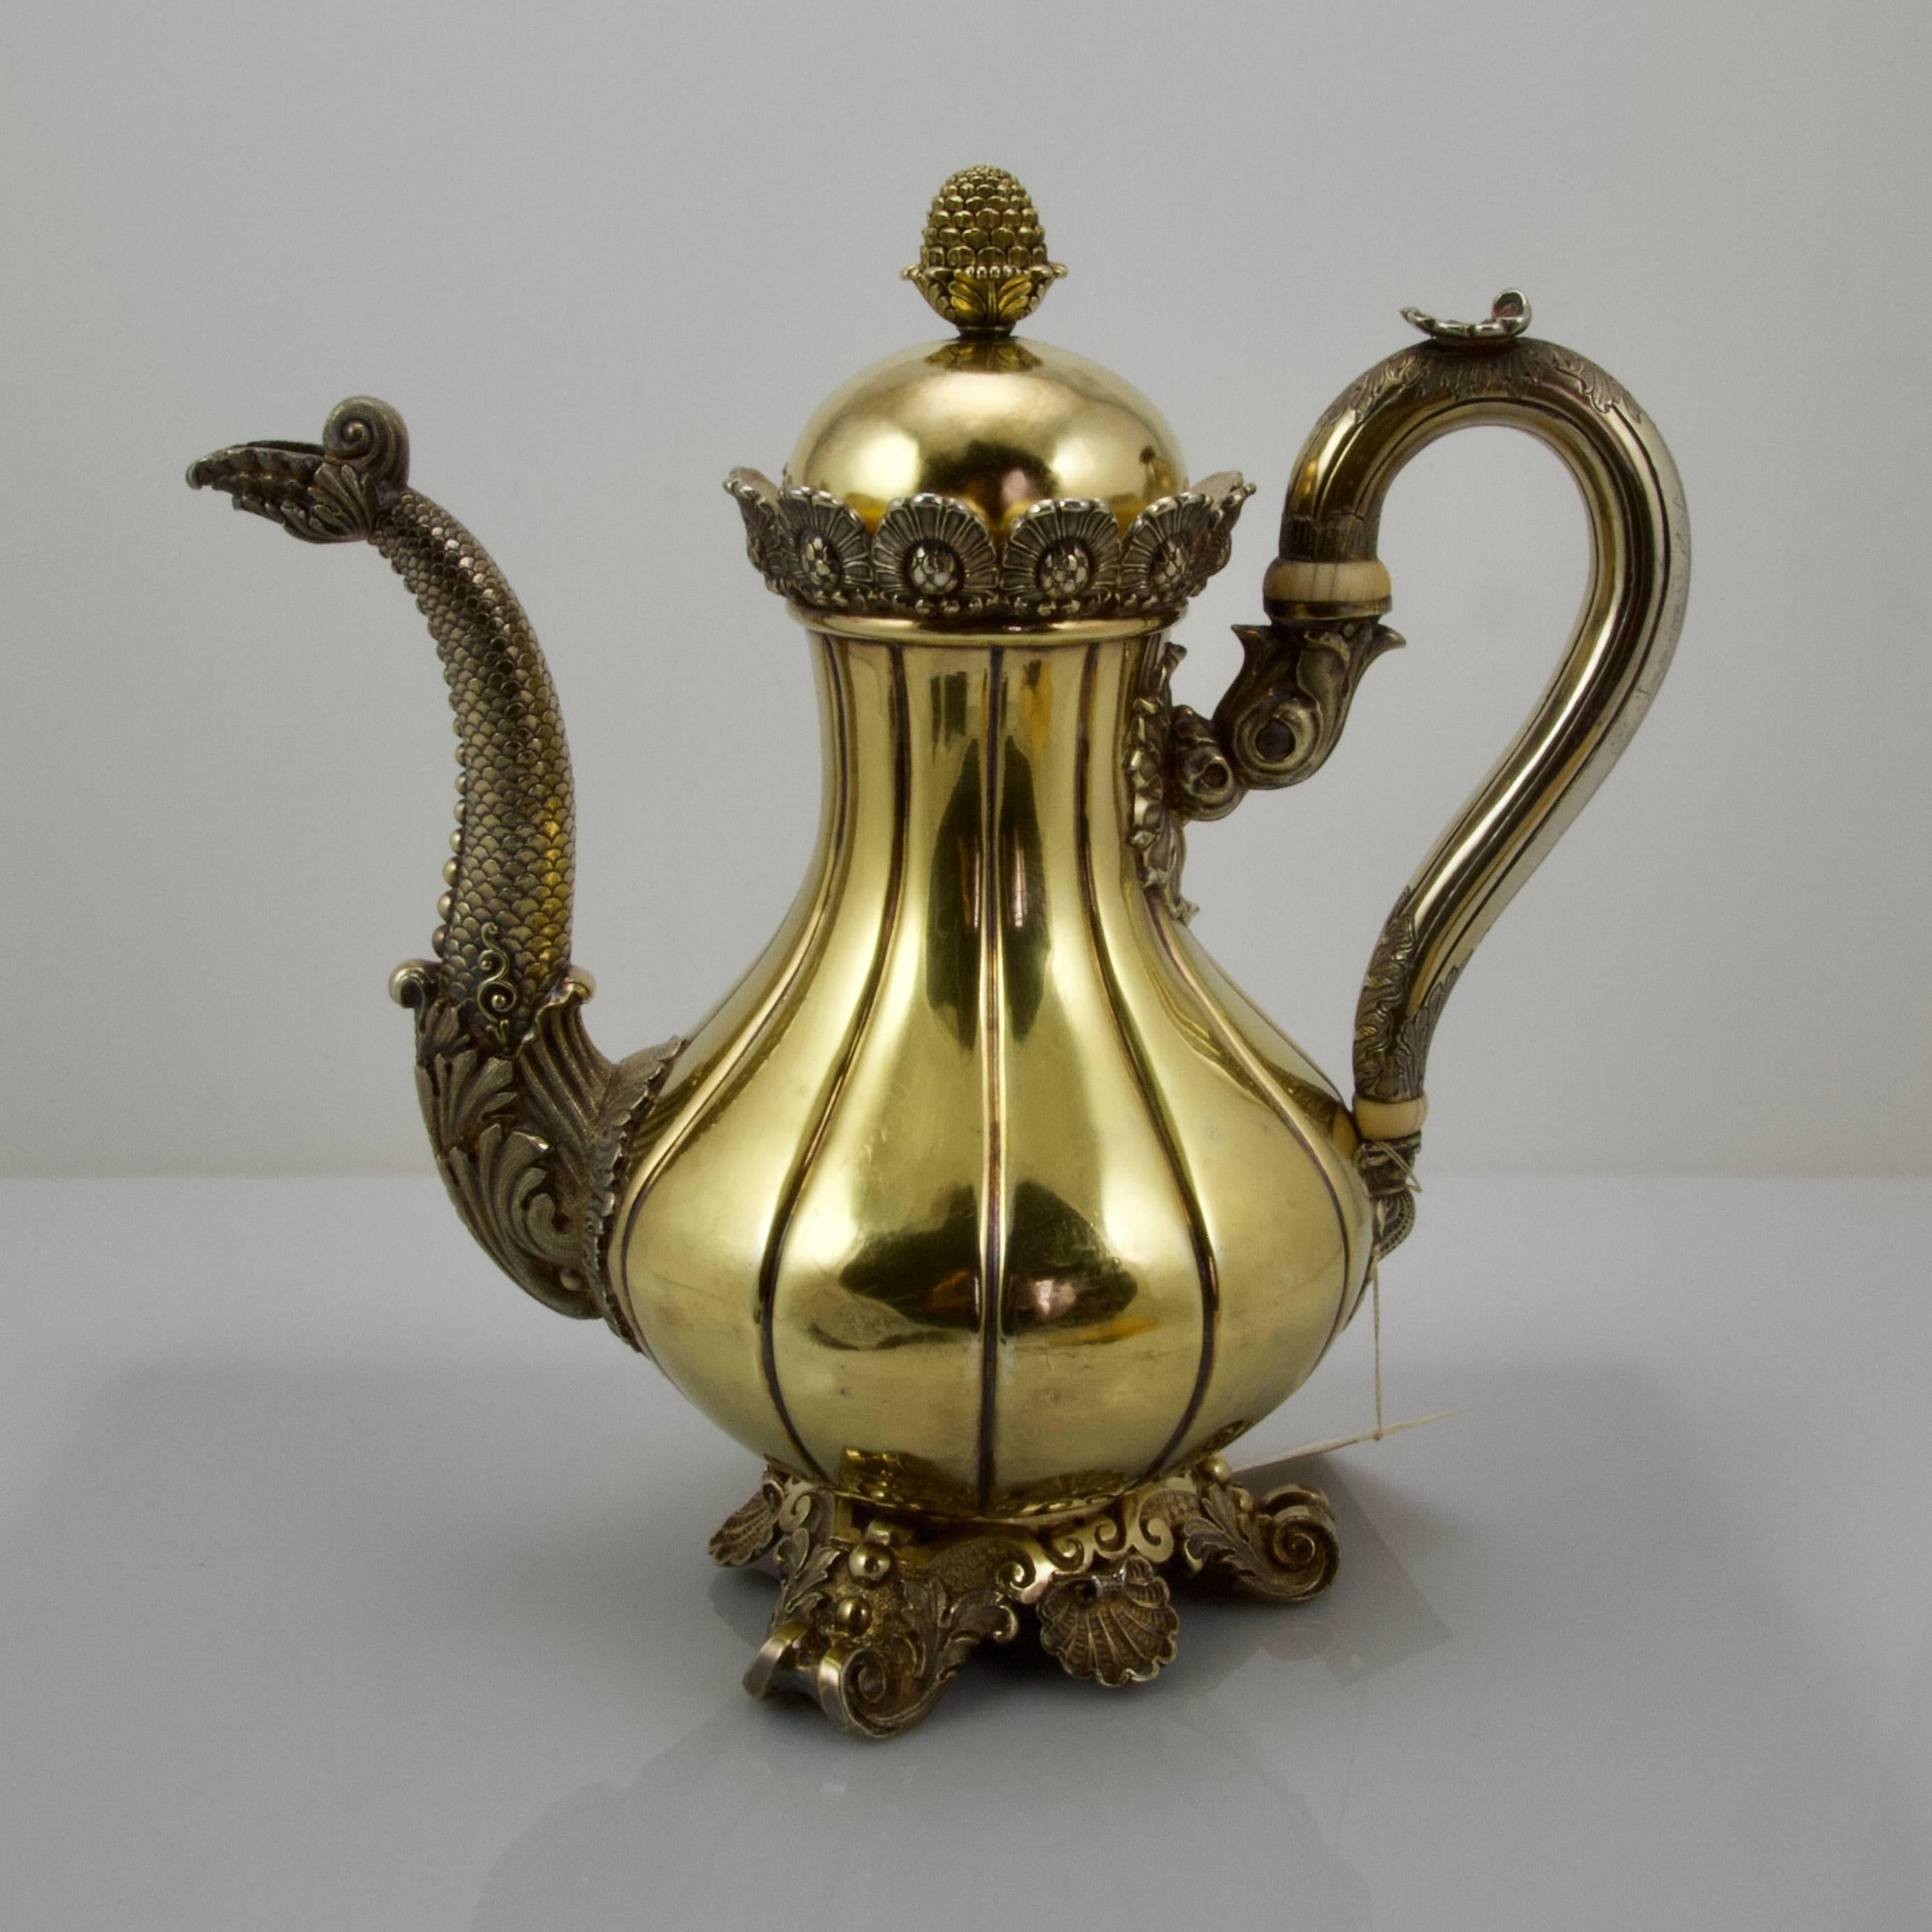 Very perfect quality of work for this coffee-pot. All the element of the silversmith technics for an unusual and oriental style pot. Smooth and matte, lattice on ground, scales, scrolls, shells, pomegranata, pine, dot, acanthus, alls in a very, very